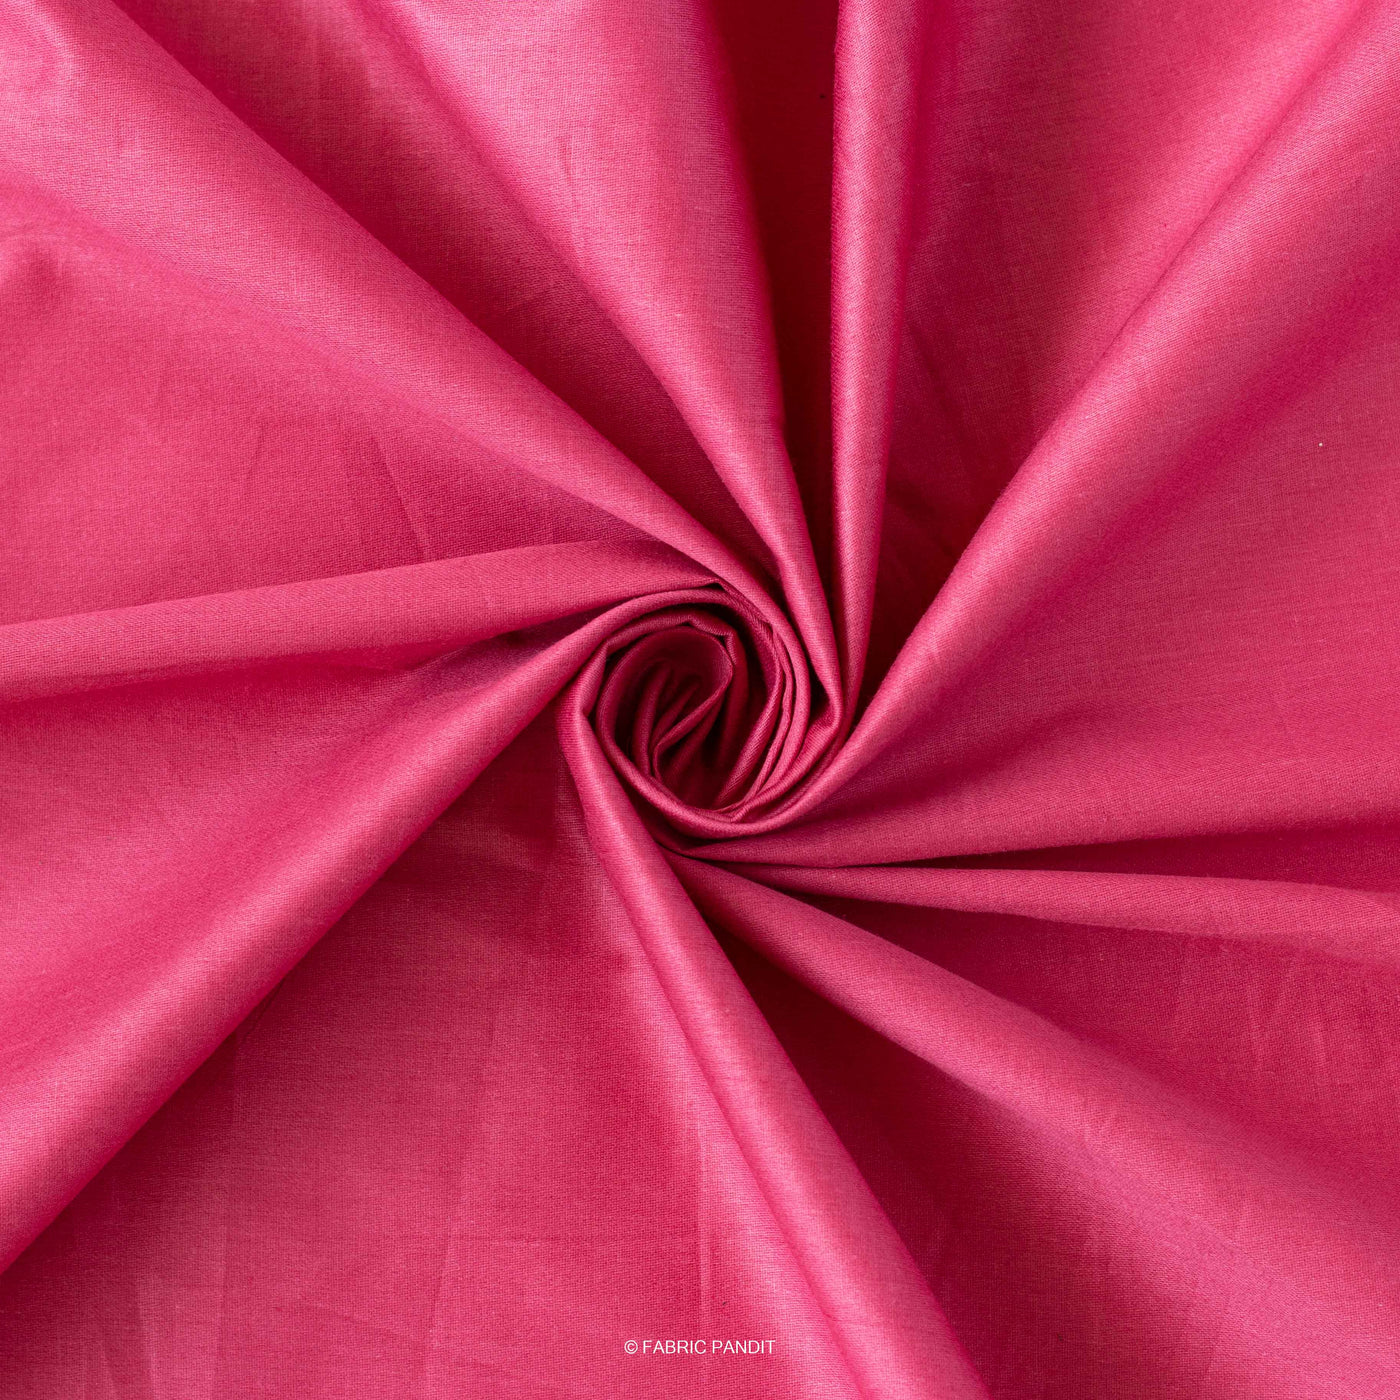 Rose Pink Color Plain Cotton Satin Fabric (Width 42 Inches